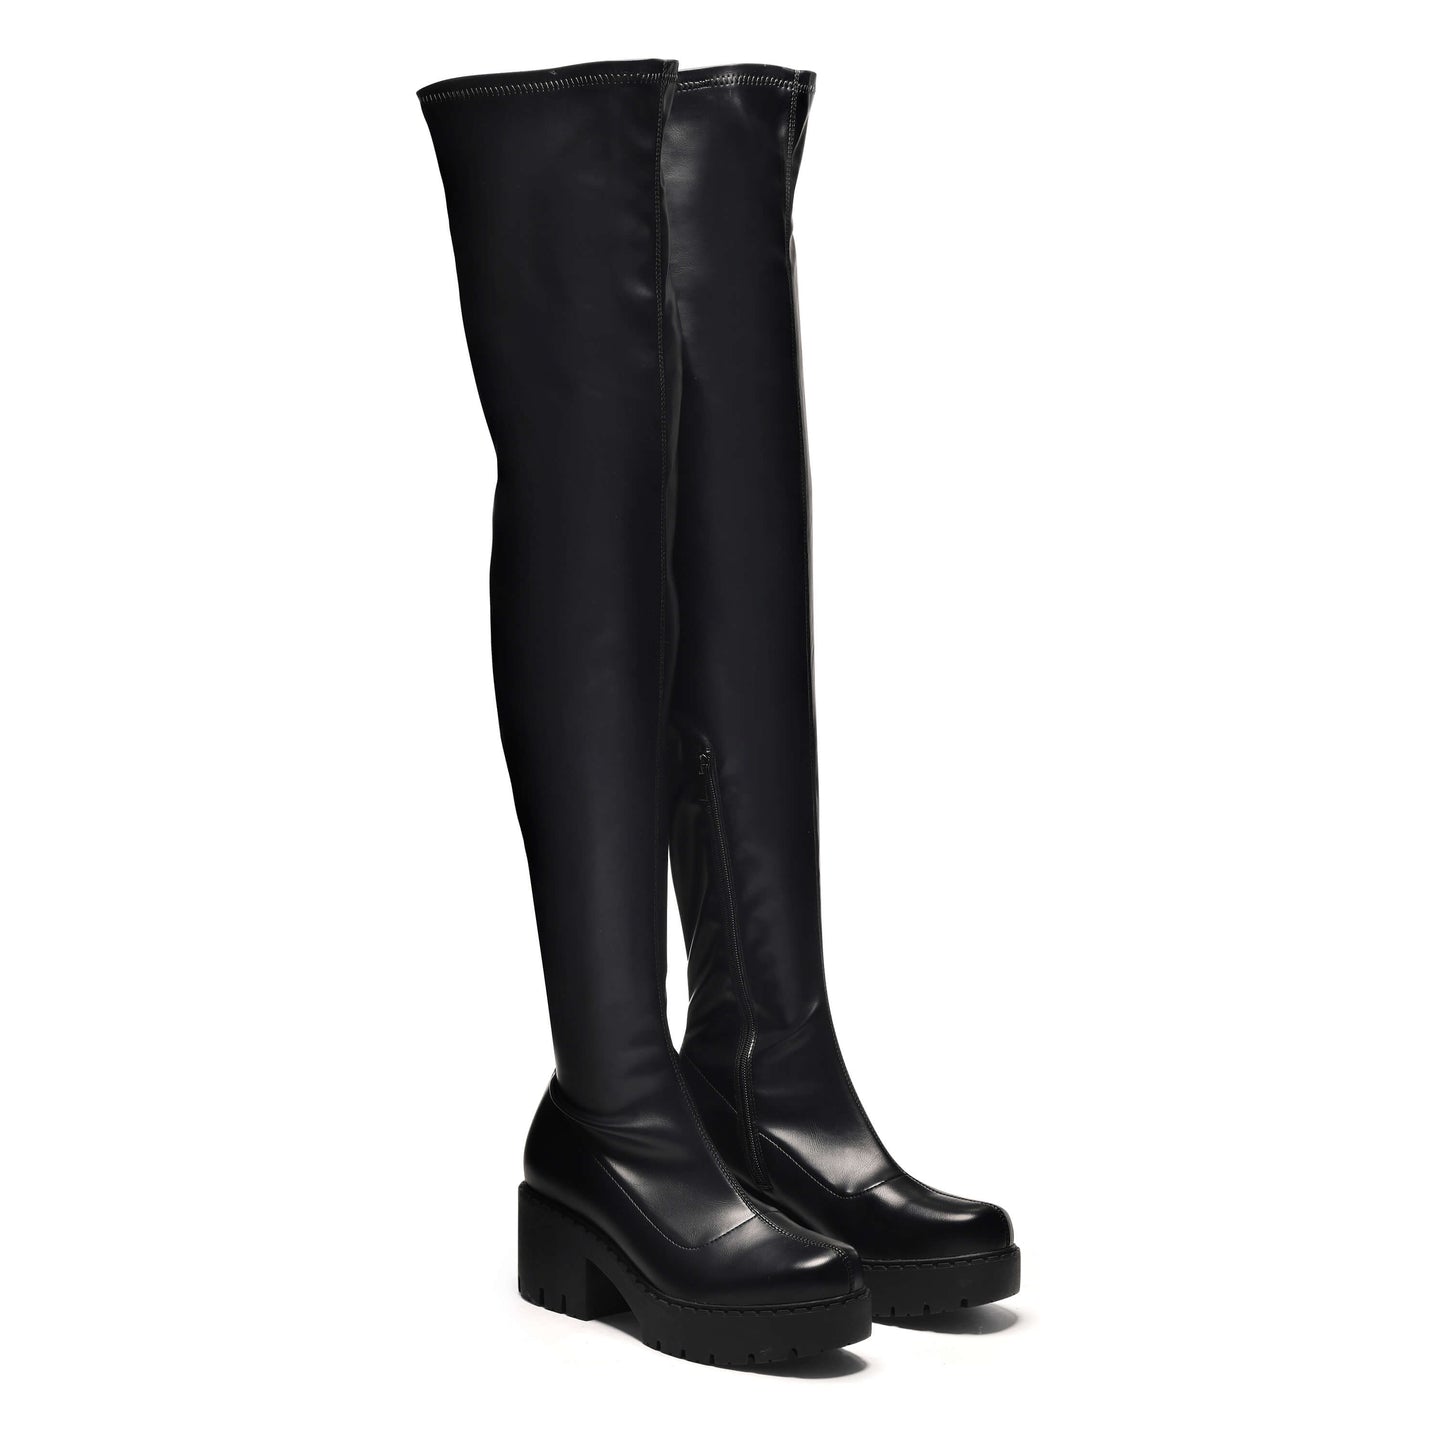 The Harmony Stretch Thigh High Boots - Long Boots - KOI Footwear - Black - Three-Quarter View